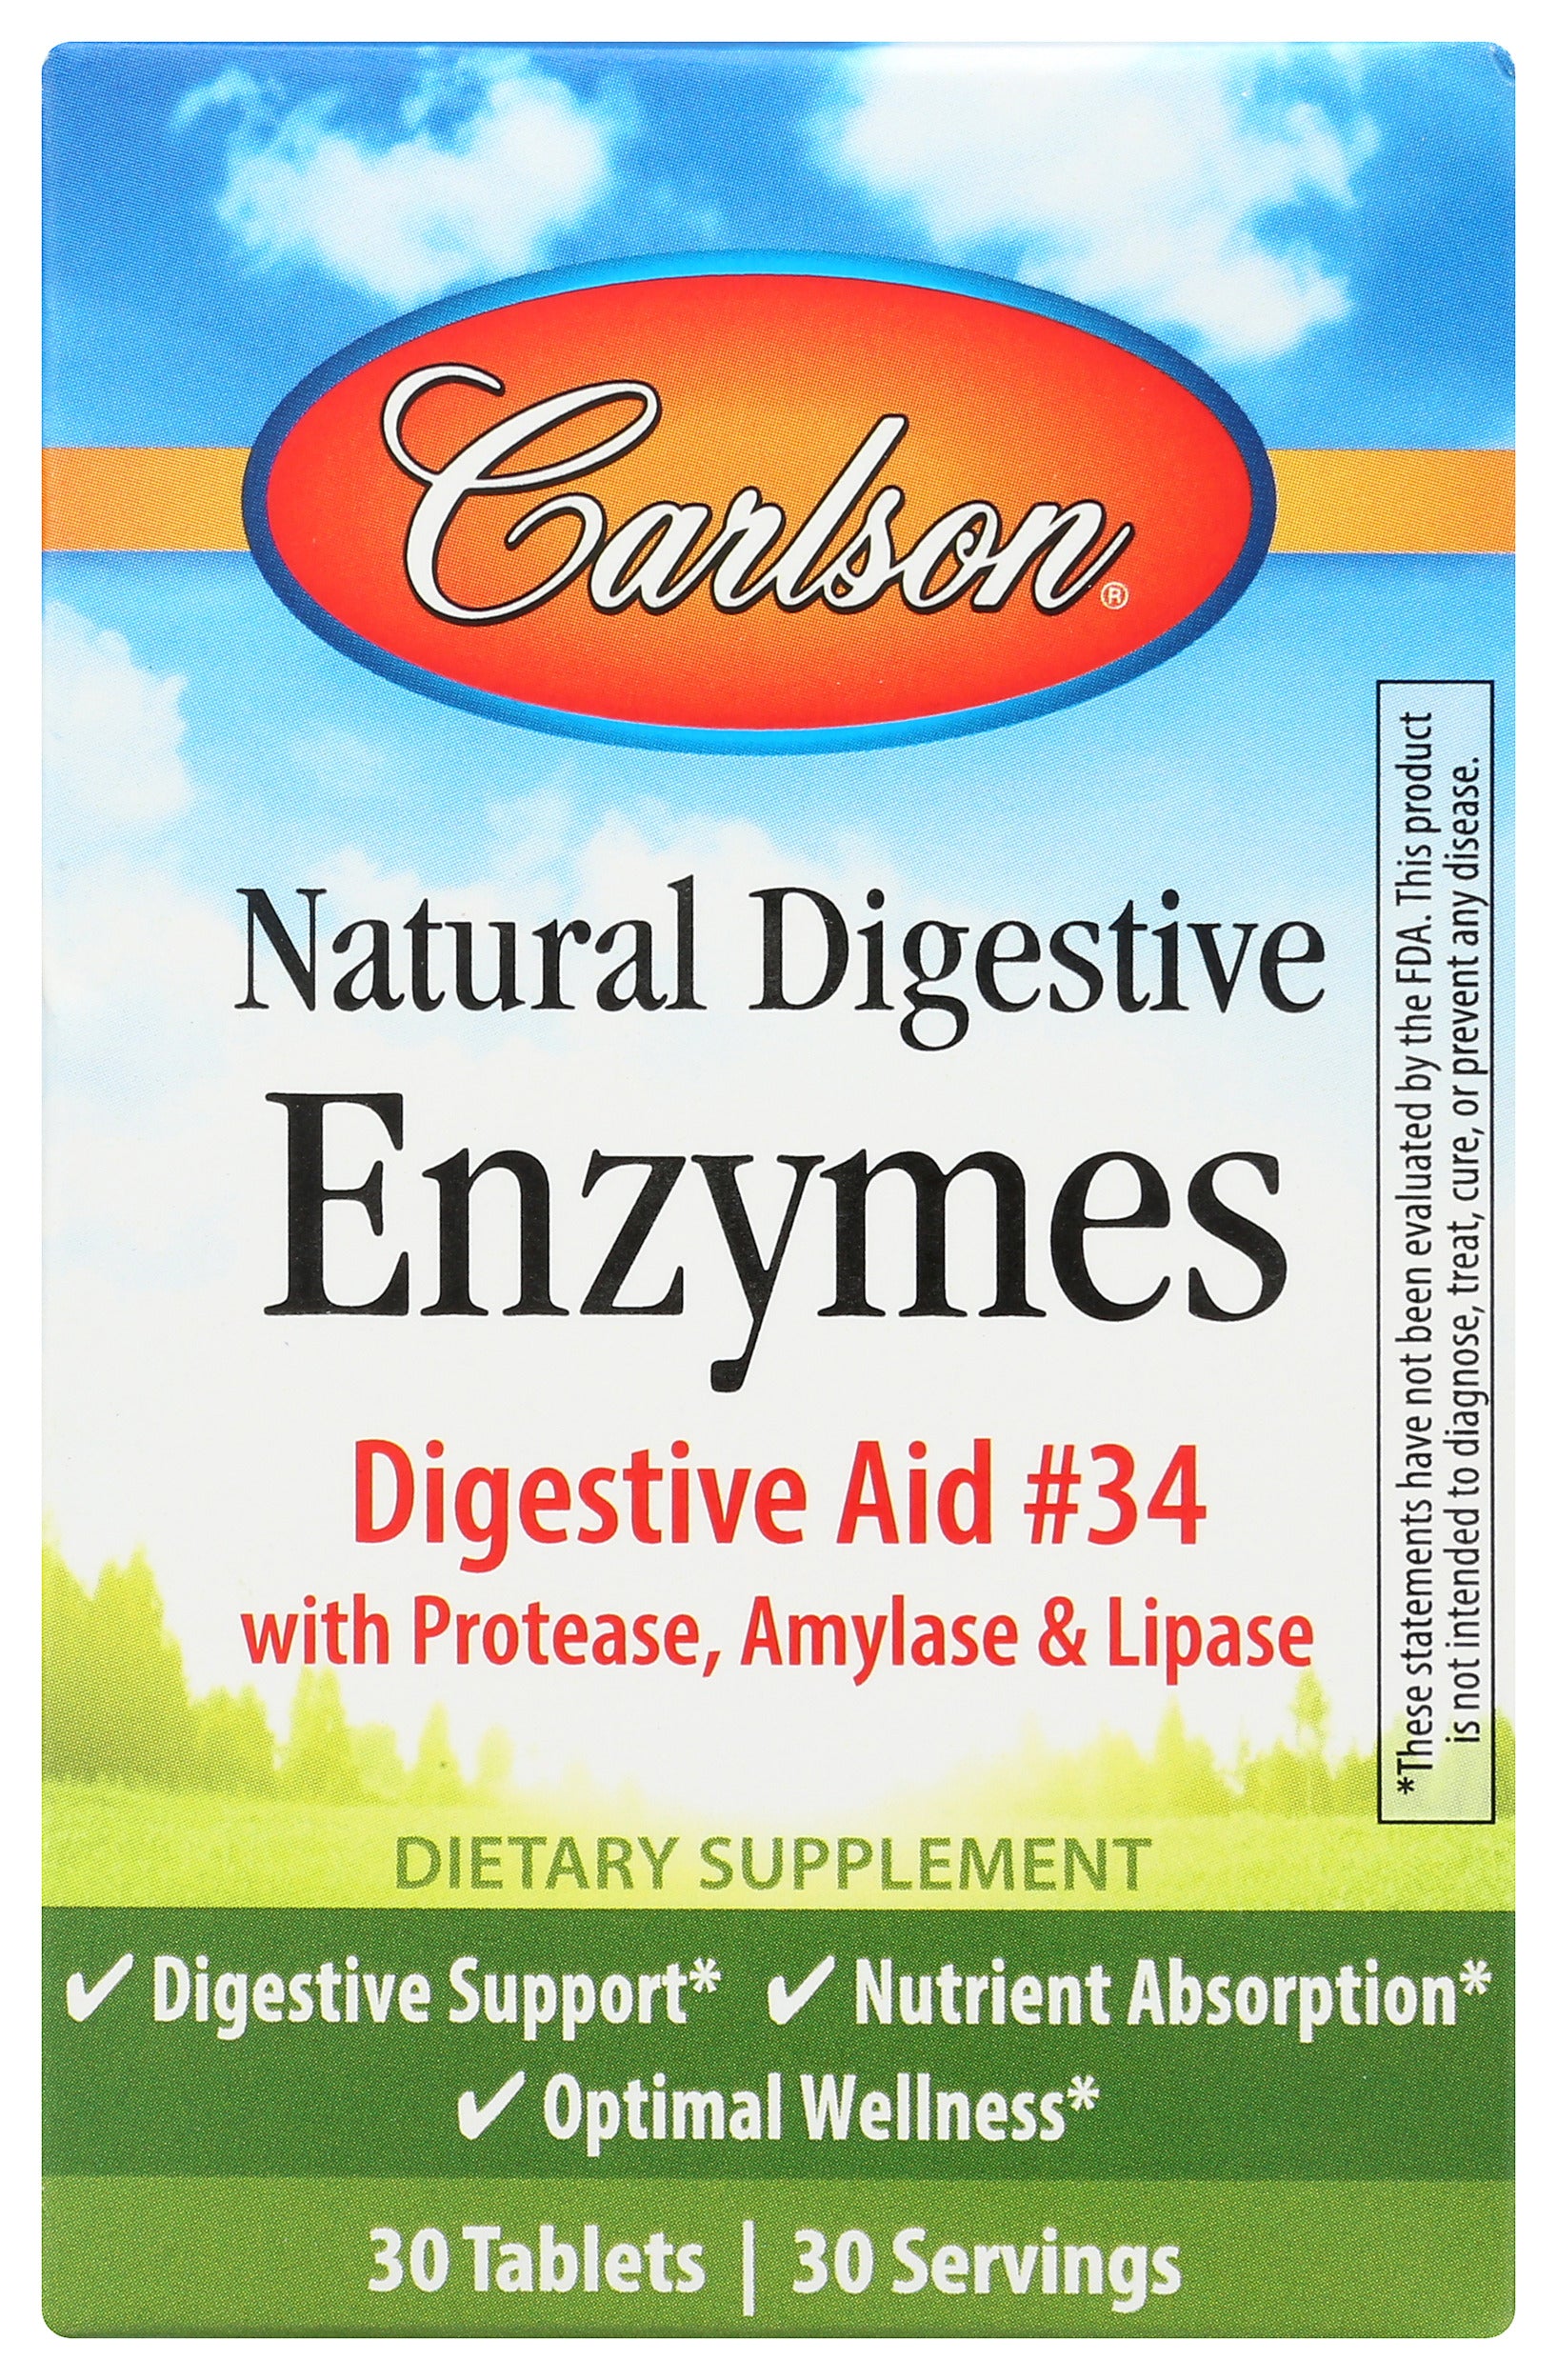 Carlson Natural Digestive Enzymes 30 Tablets Front